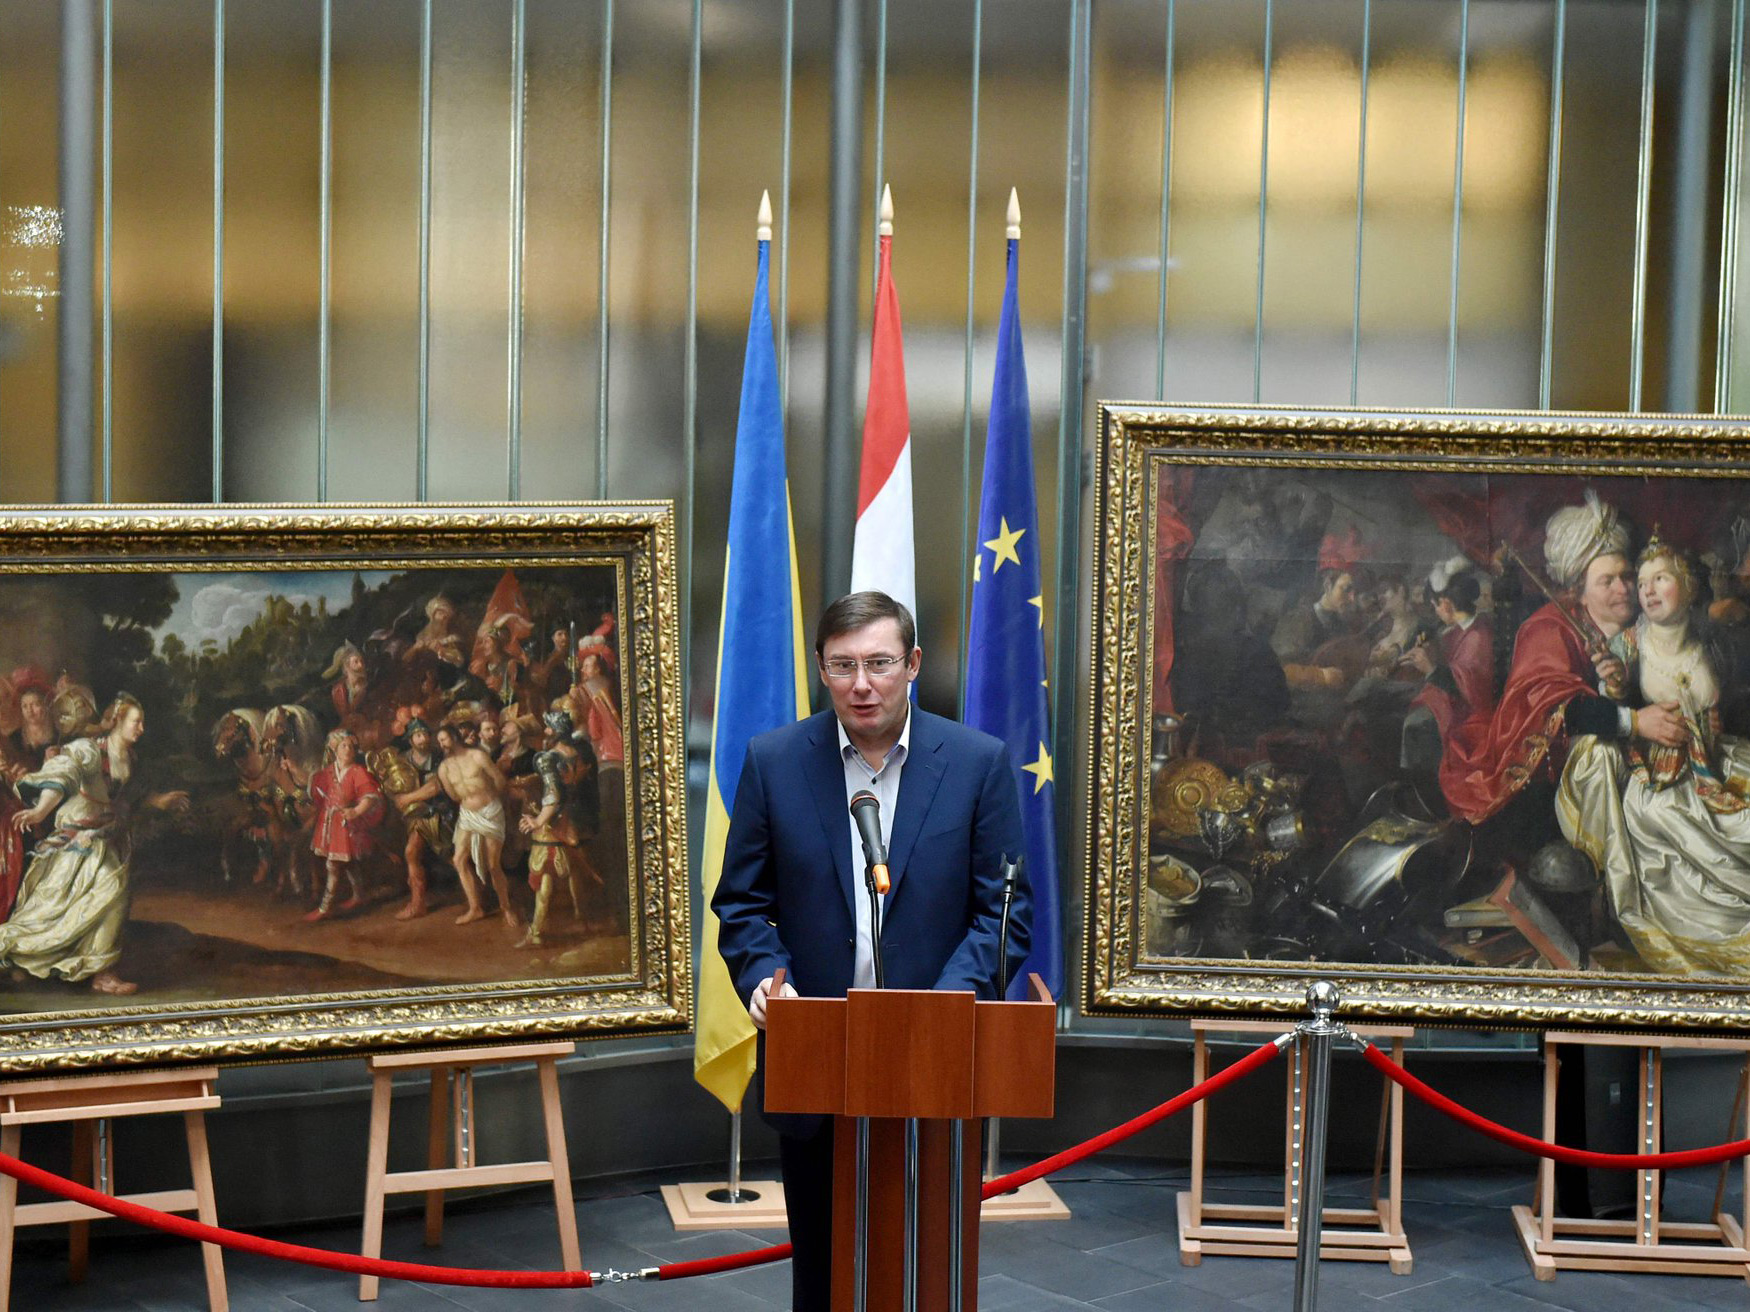 prosecutor-general-of-ukraine-yuriy-lutsenko-at-a-ceremony-in-kiev-on-september-16-2016-for-the-return-of-five-paintings-stolen-from-westfries-museum-photo-by-sergei-supinsky-afp